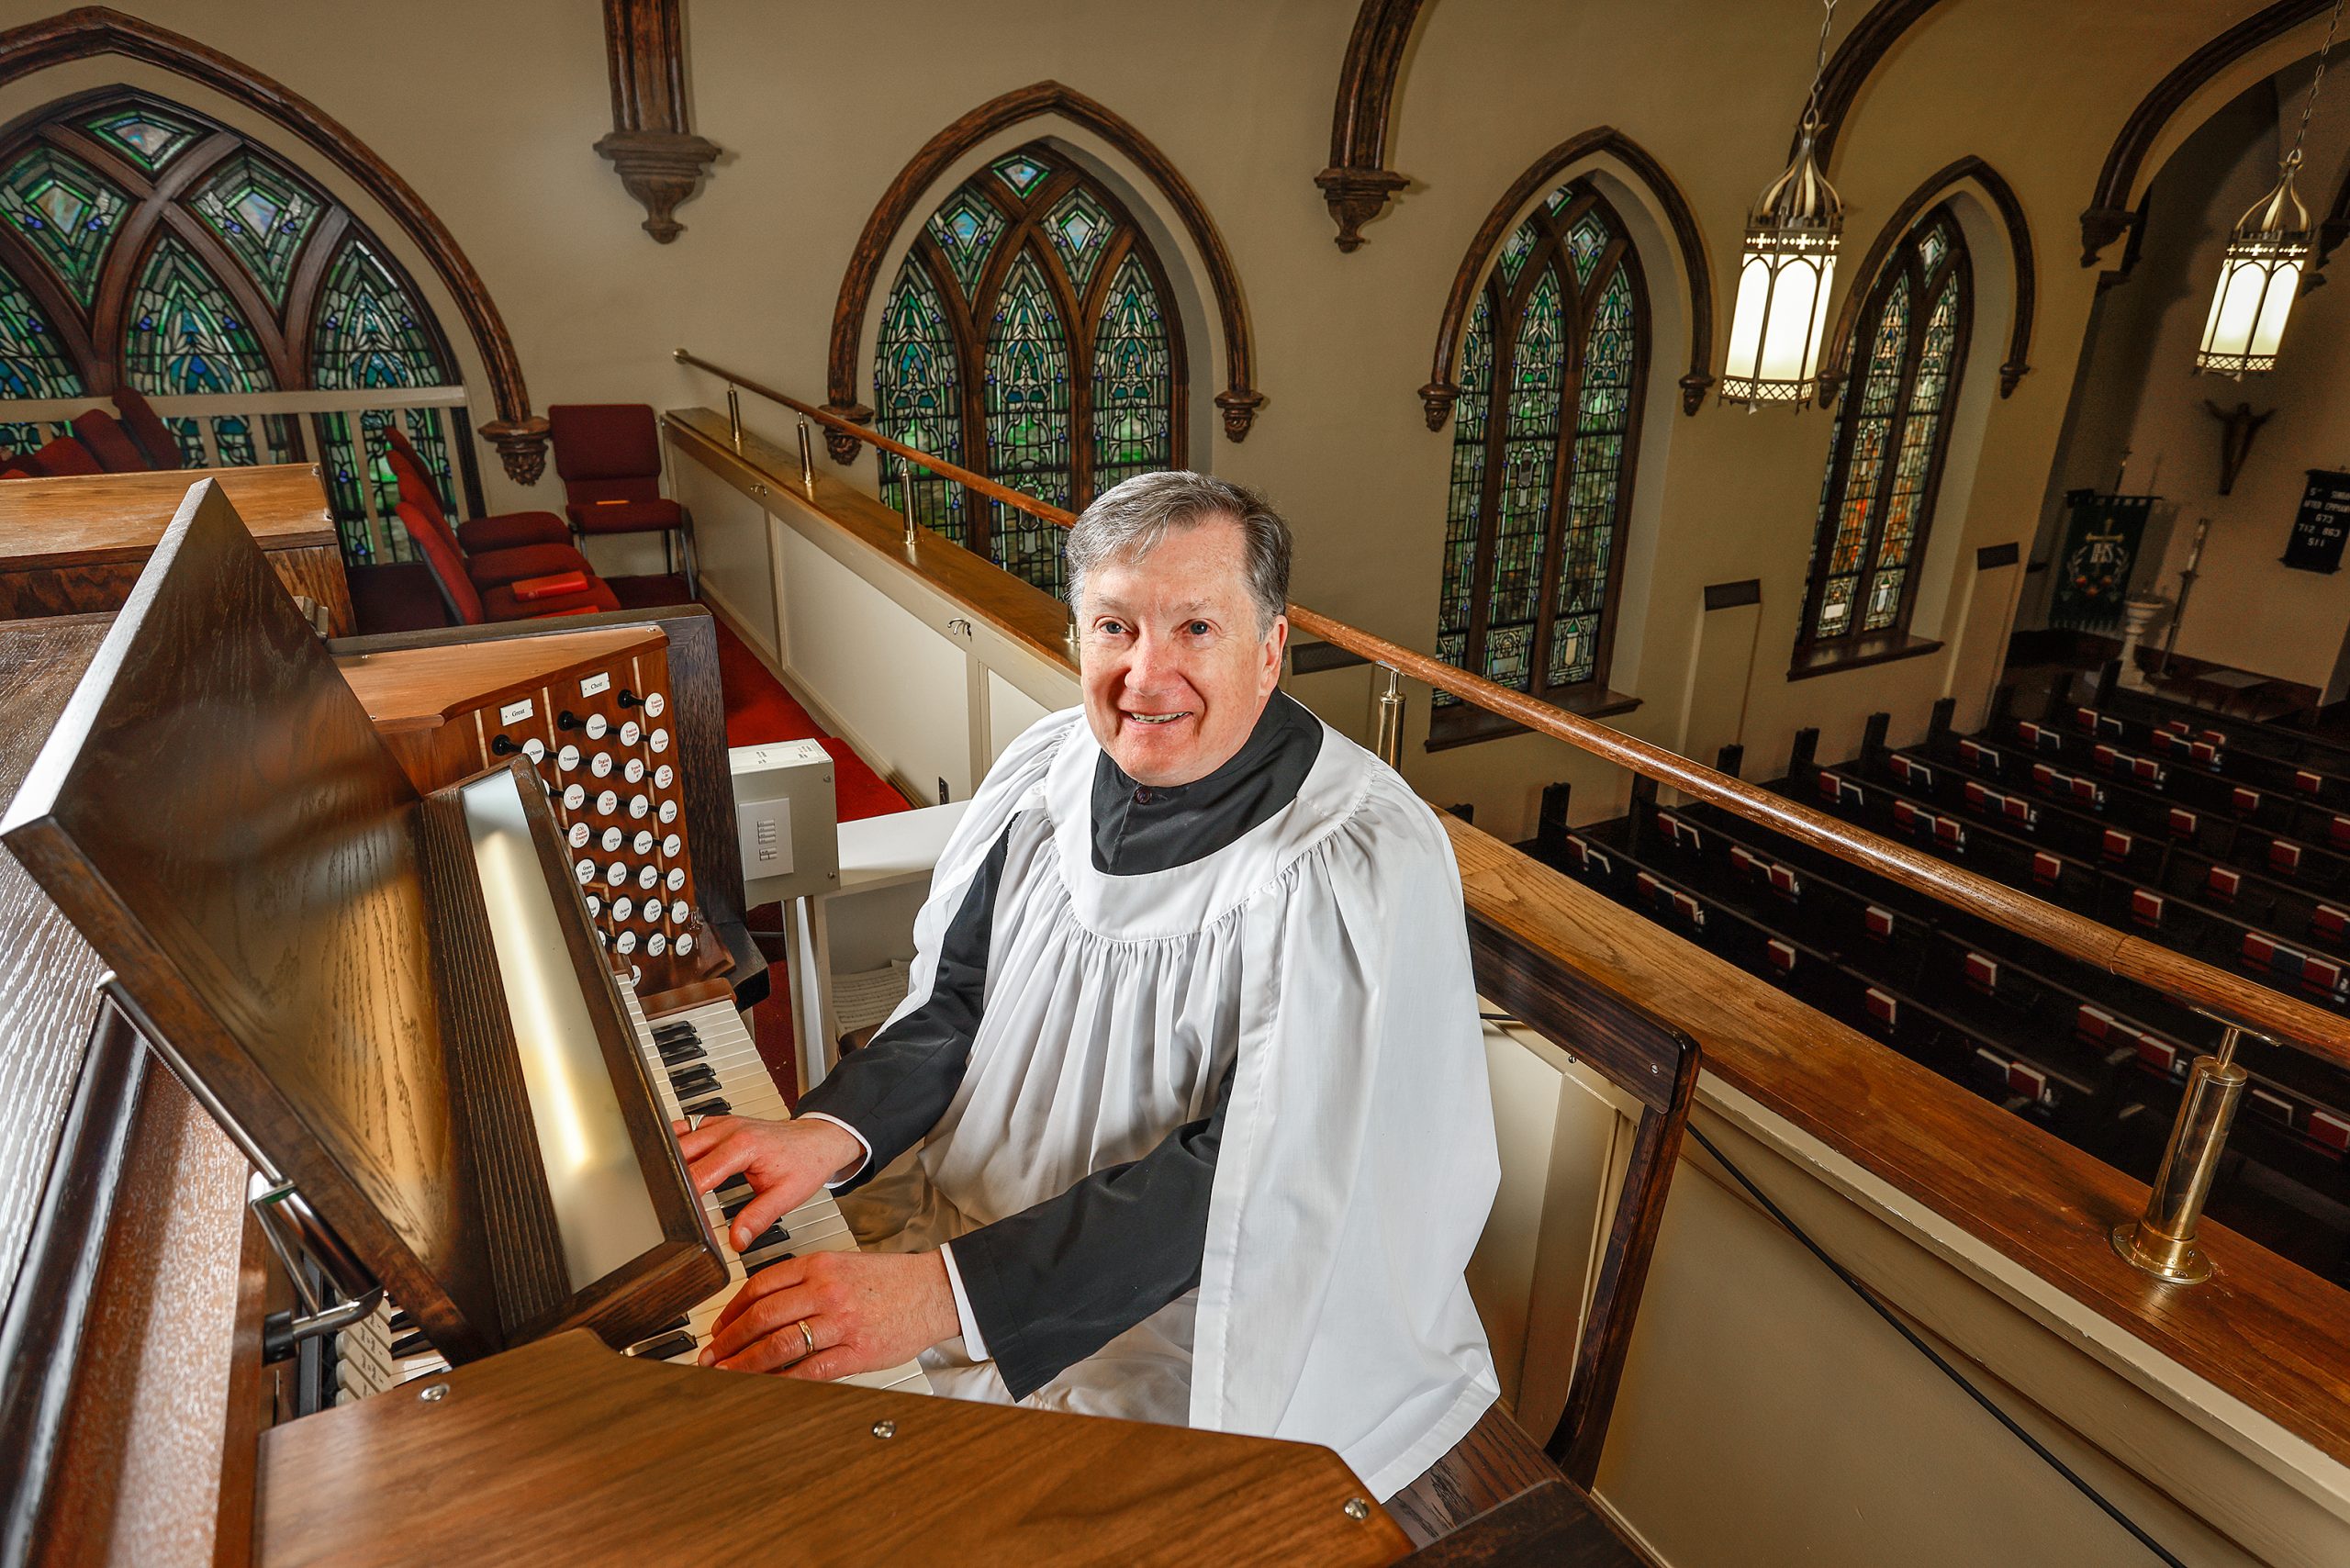 Henry Fulmer has served as church musician at St. Paul’s Lutheran Church since 2015. In the role of organist and director of music, he oversees all aspects of the historic downtown parish’s music ministry and outreach. The church organ was rebuilt and tonally enhanced in 2018 by the North Carolina pipe organ manufacturer Cornel Zimmer Organ Builders. It is the fourth pipe organ in the present edifice.
